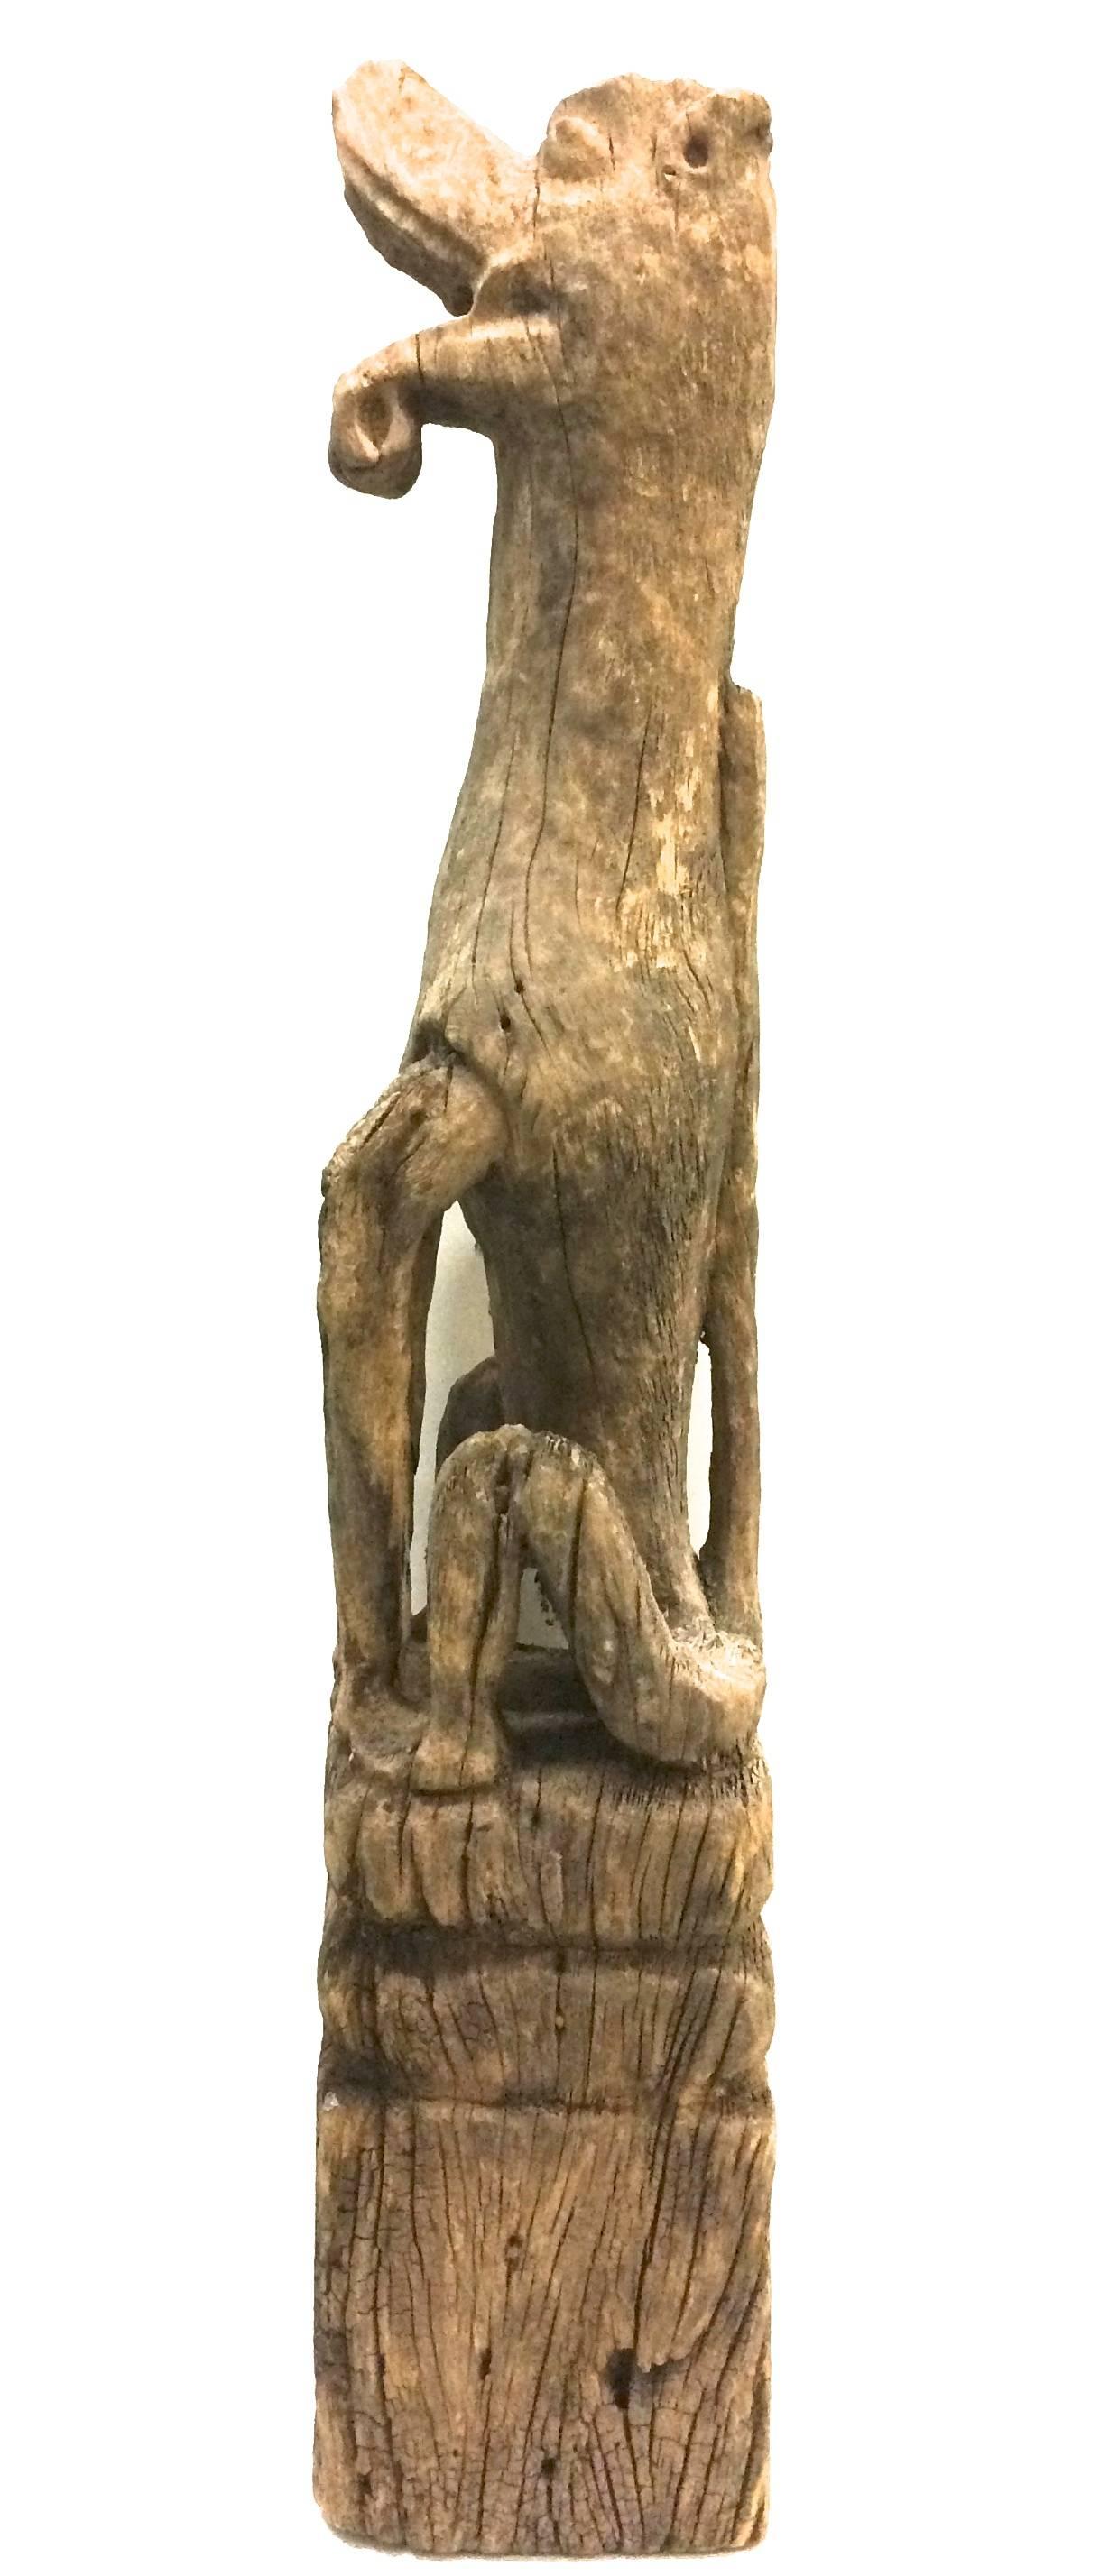 Antique Tribal Guardian Dog Wood Statue BALI - Sculpture by Unknown